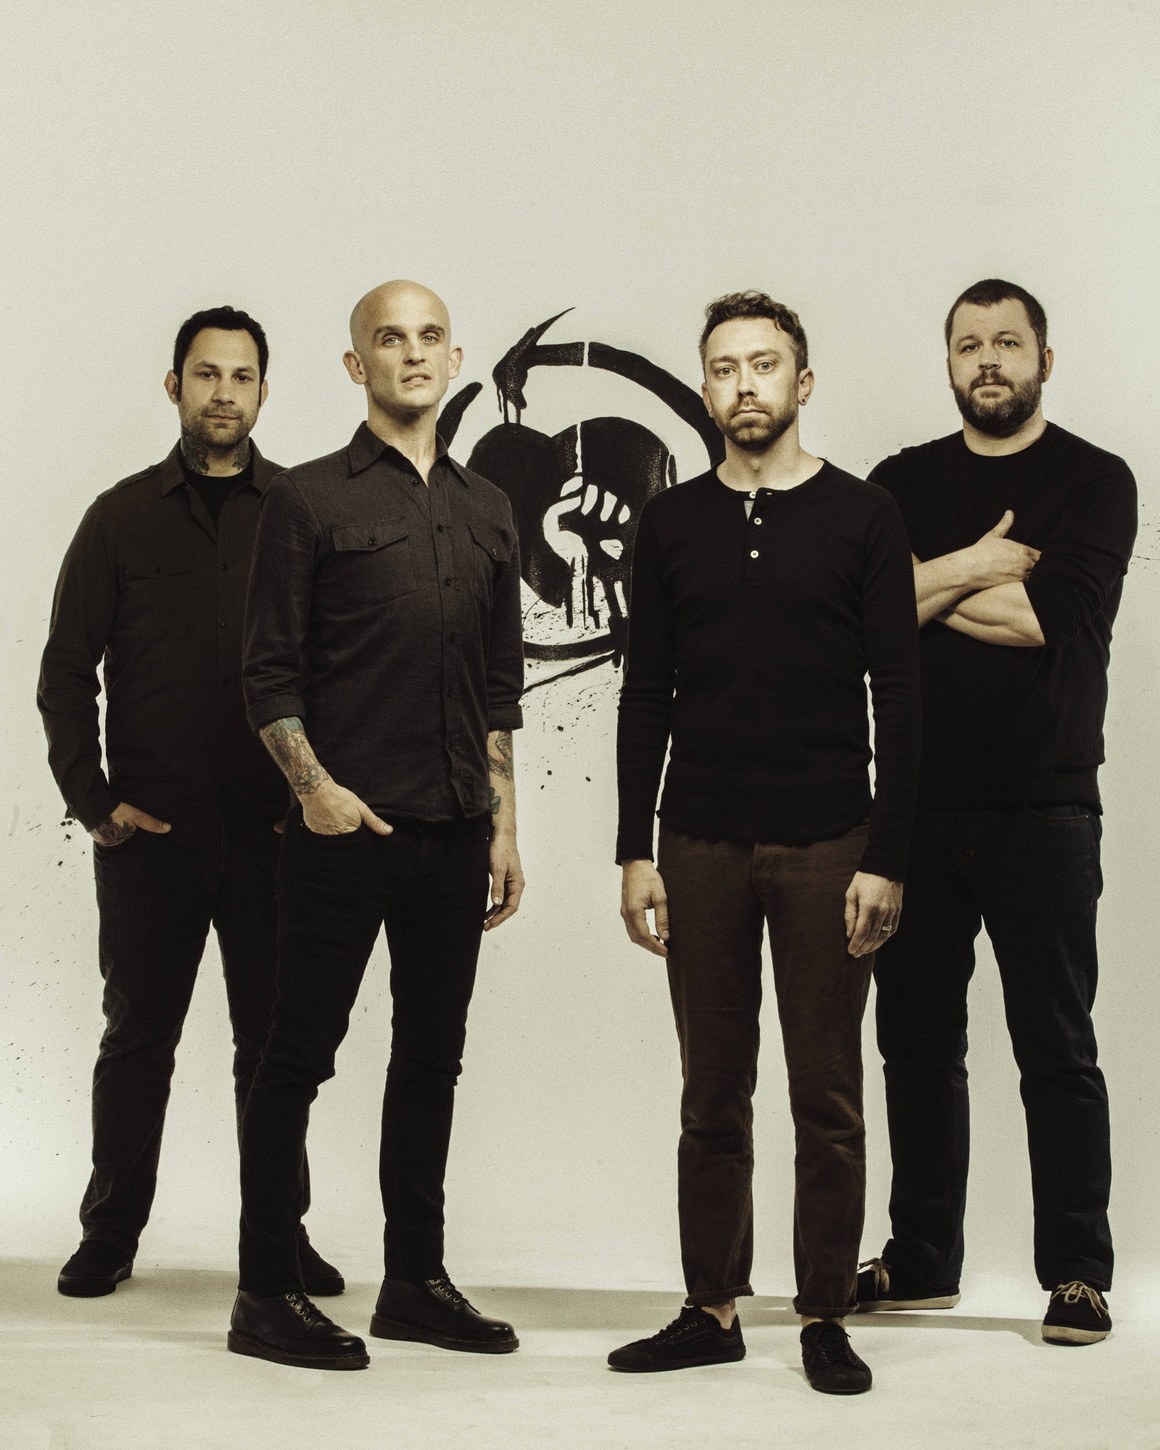 rise against tour germany